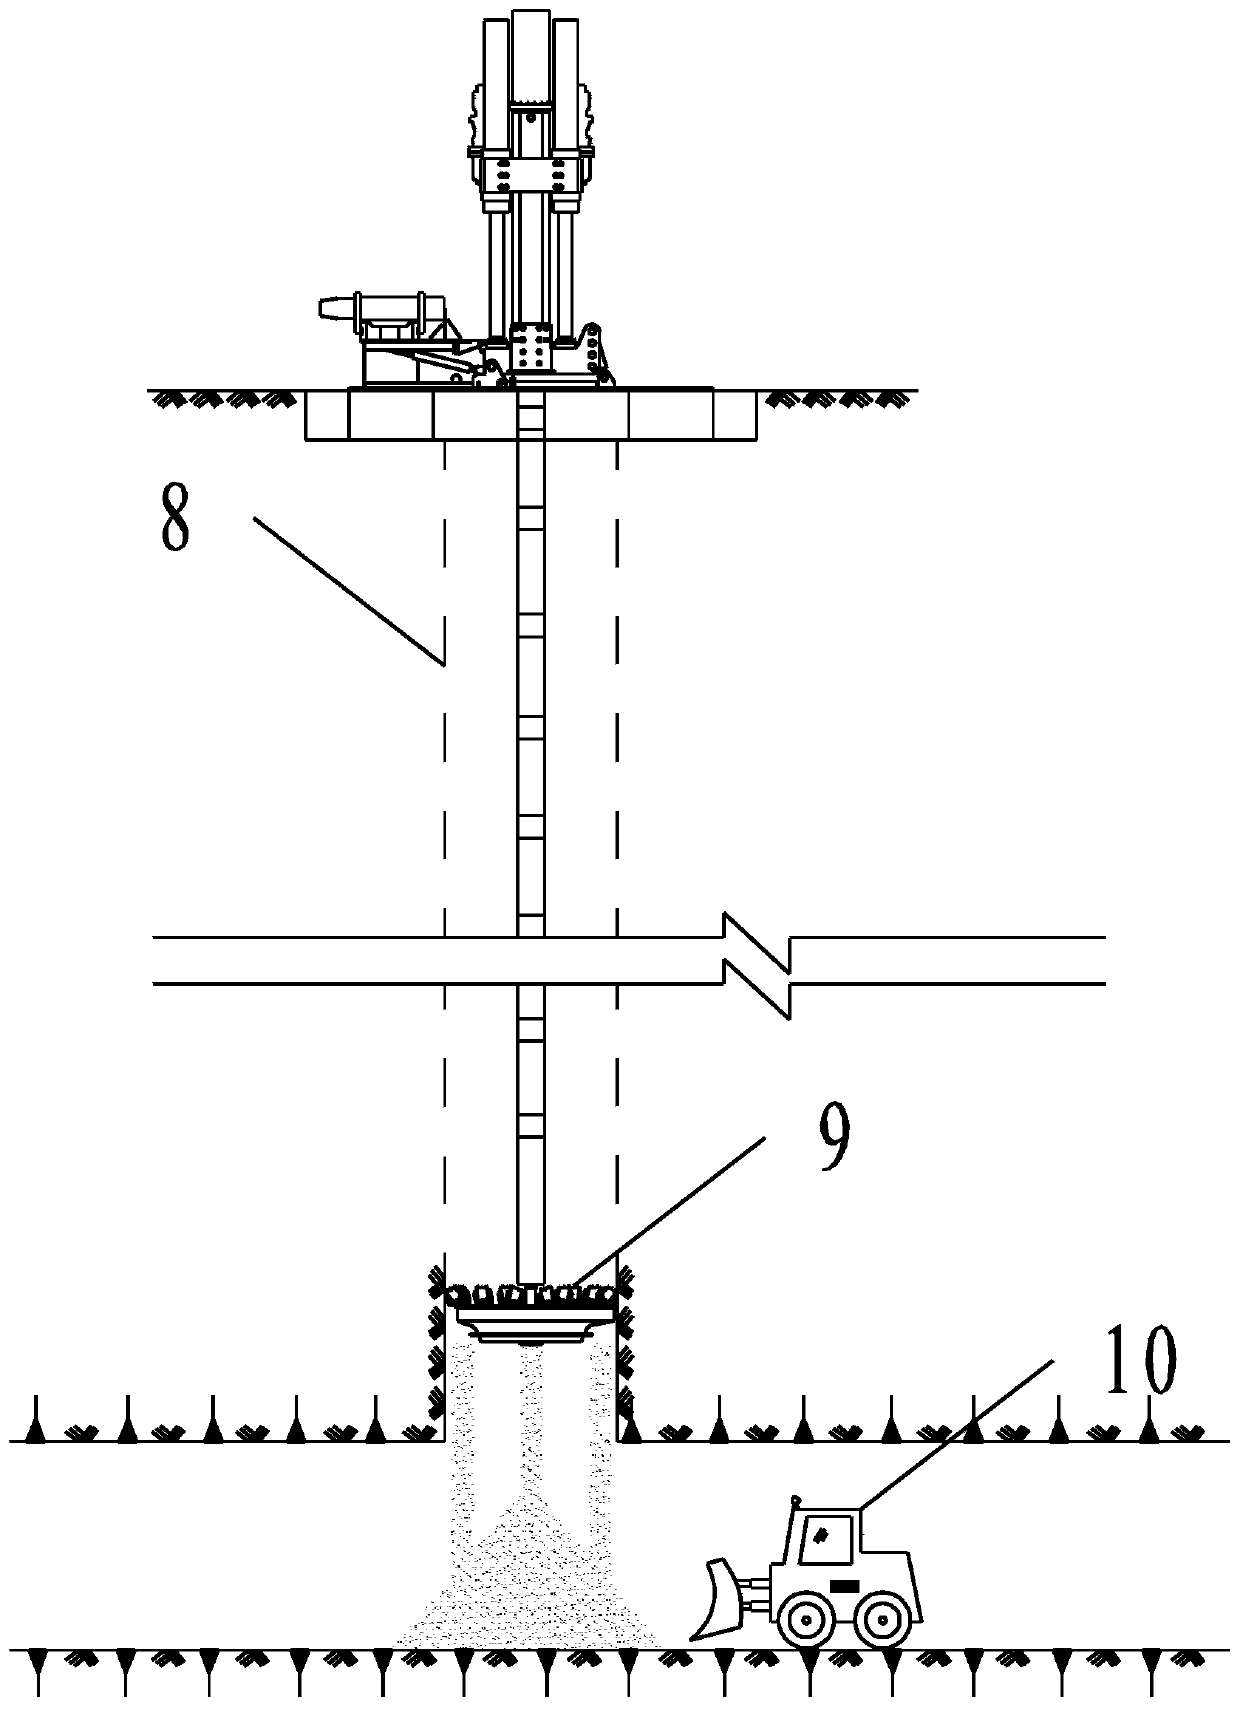 Forward-reverse-forward three-stage drilling mechanical rock breaking and shaft sinking method